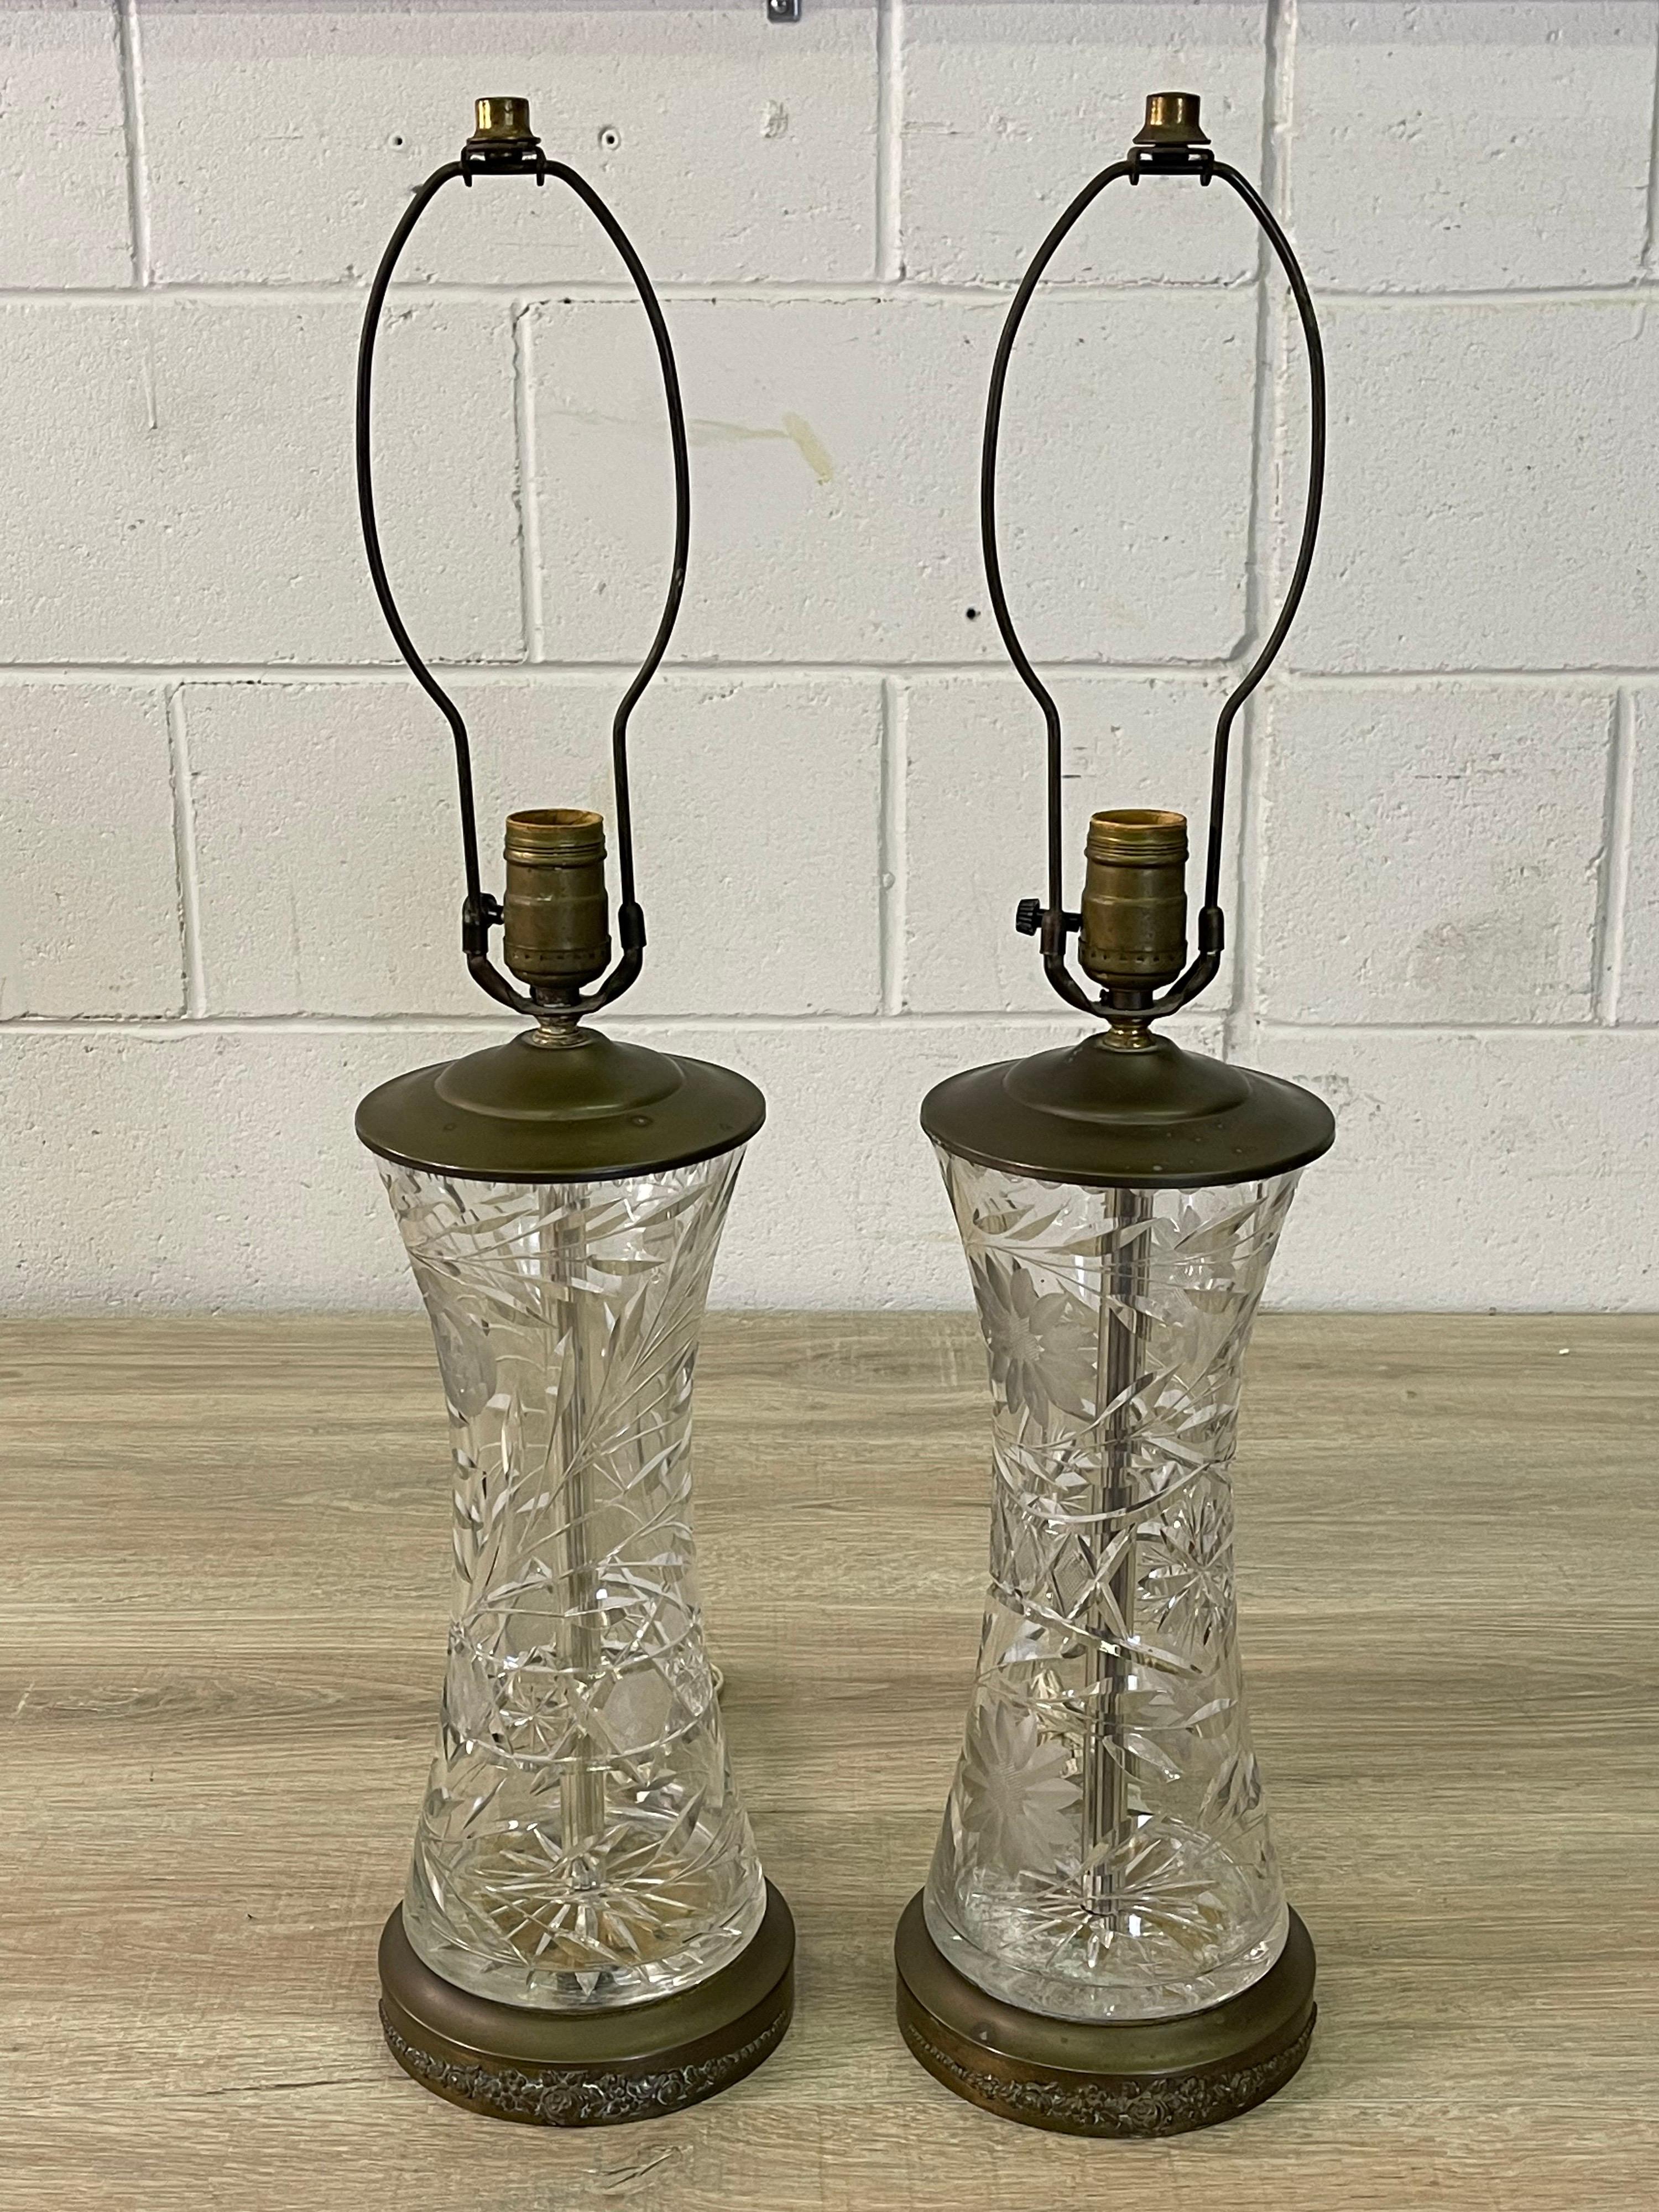 Vintage 1950s pair of floral glass table lamps with brass accents. The top and bottom of the lamps are brass while the center is all glass with a floral design. Wired for the US and in working condition. The brass base has a rose floral design.